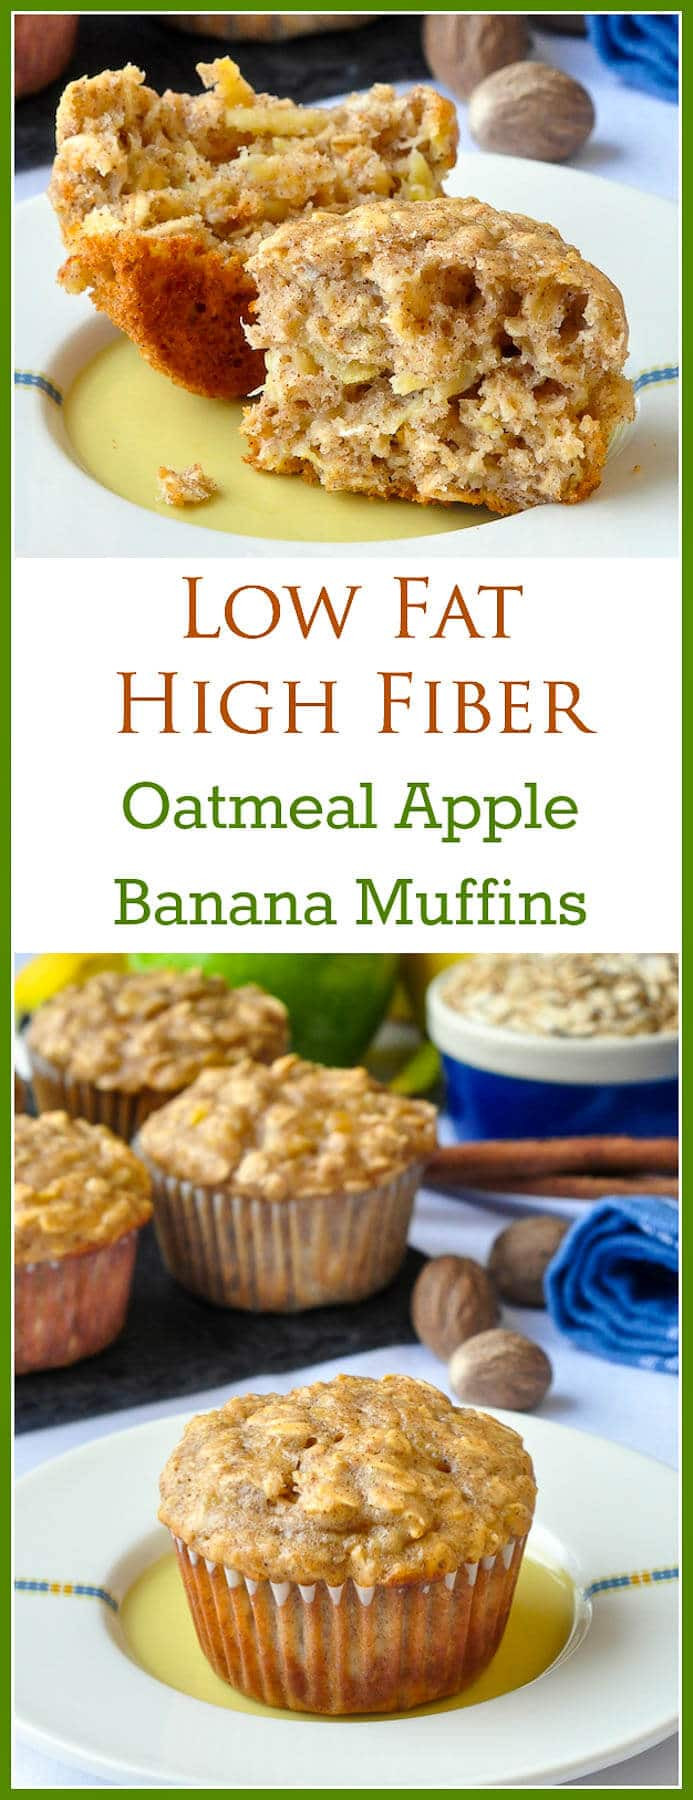 Low Calorie Muffin Recipes
 Oatmeal Apple Banana Low Fat Muffins Easy delicious